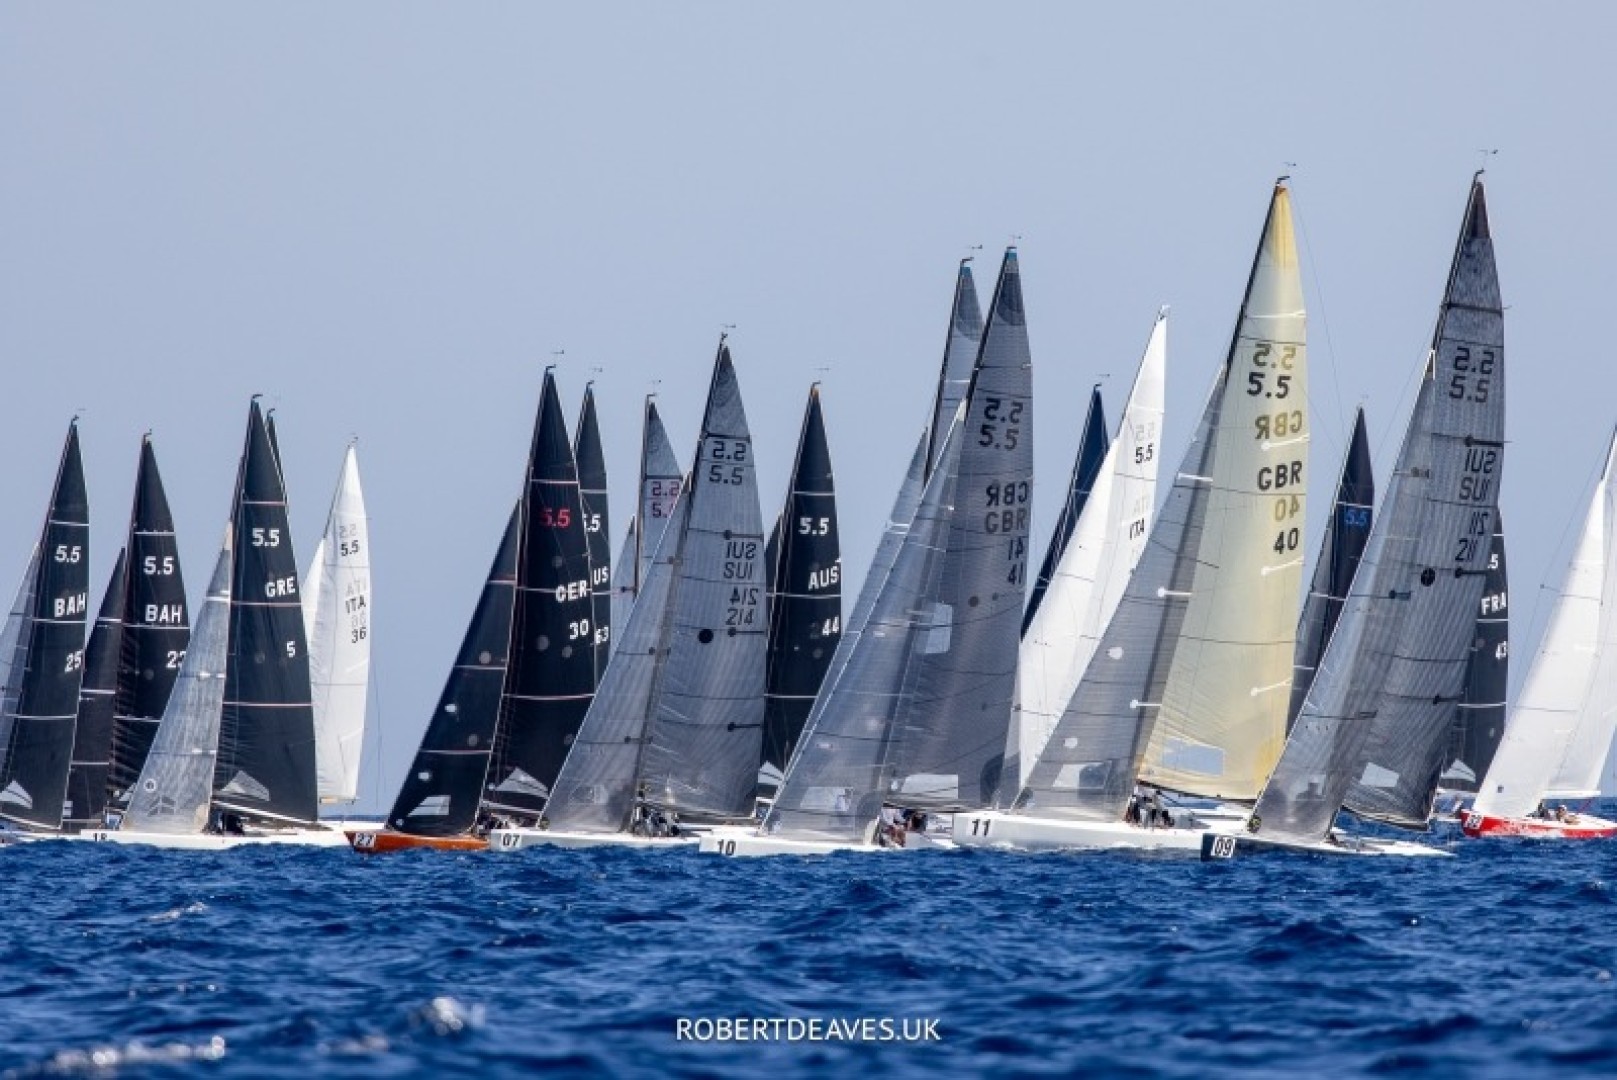 Aspire holds onto provisional overall lead at International 5.5 Metre Class